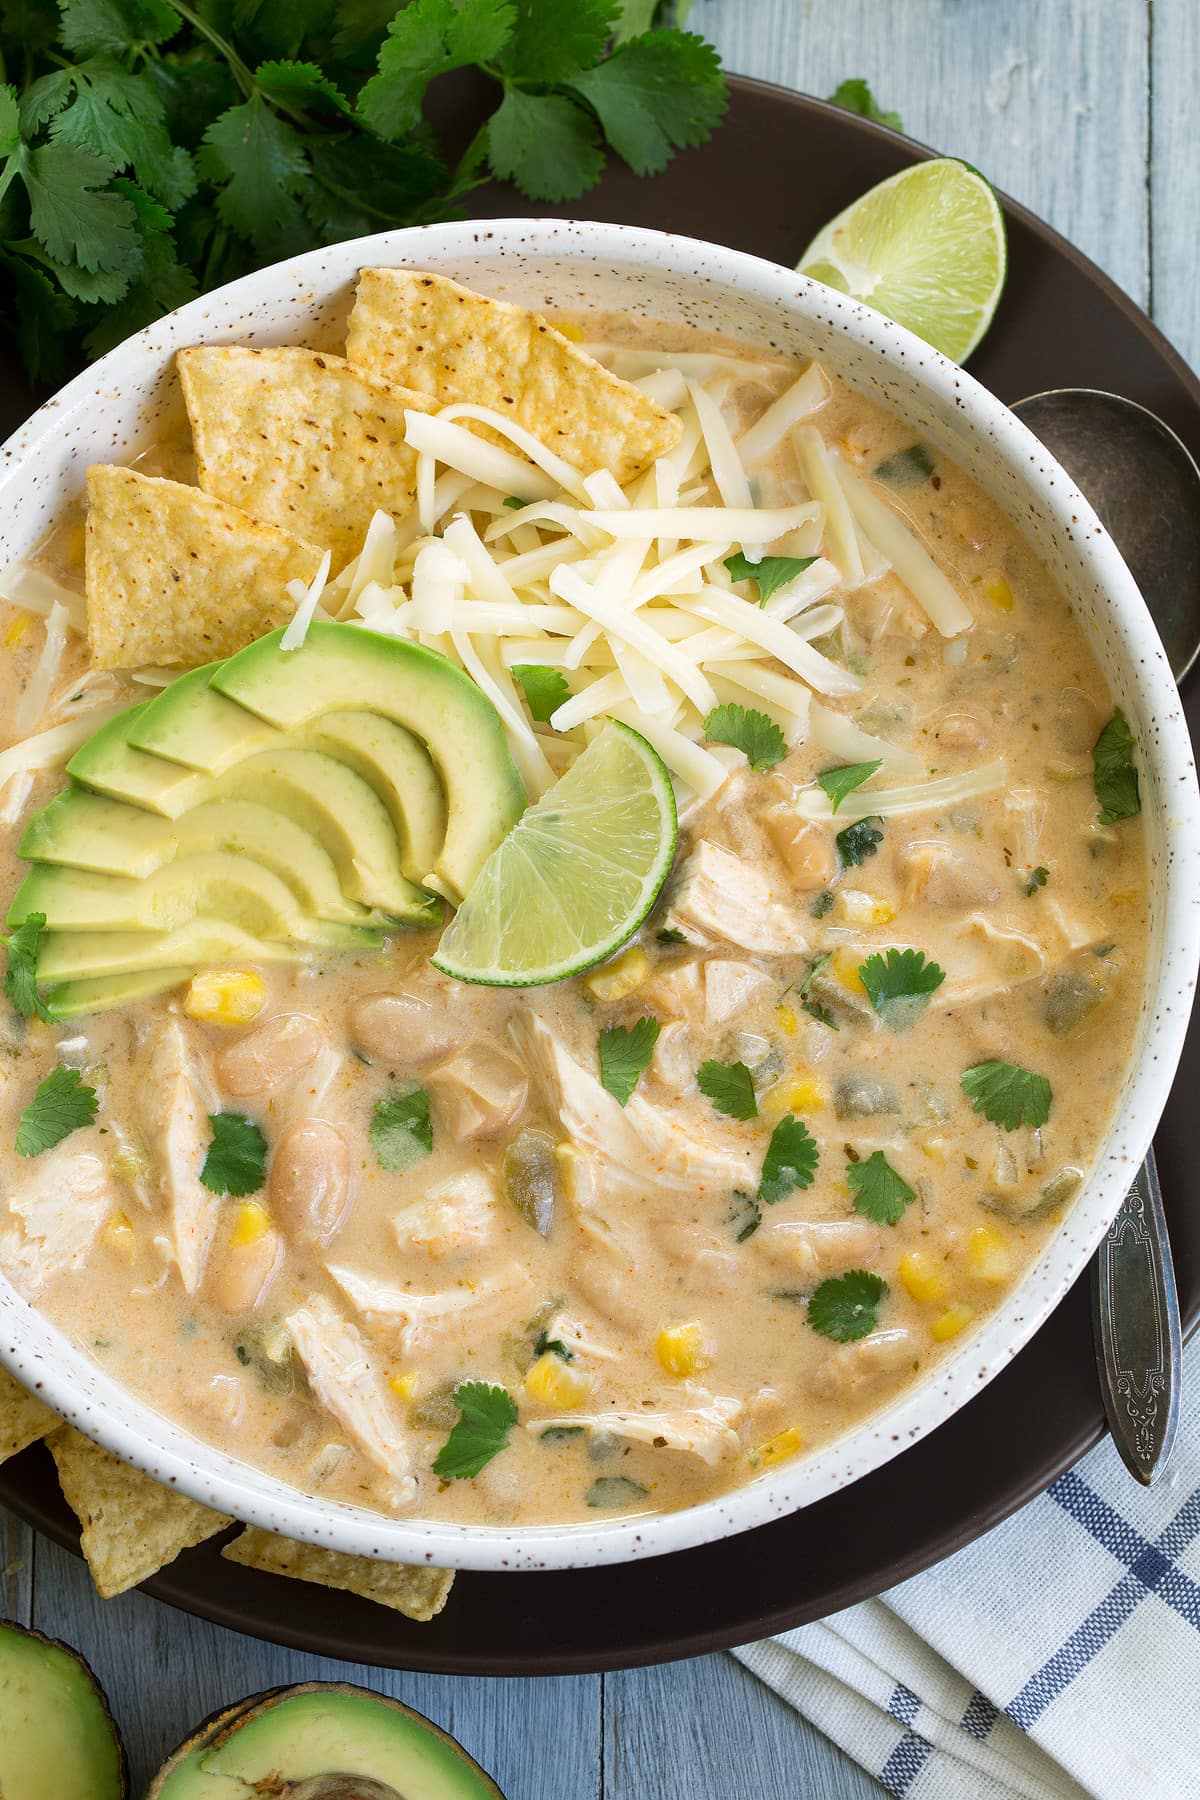 Overhead image of white chicken chili in a large white bowl sitting on a brown plate. Chili is garnished with cheese, chips, avocado, cilantro and lime.